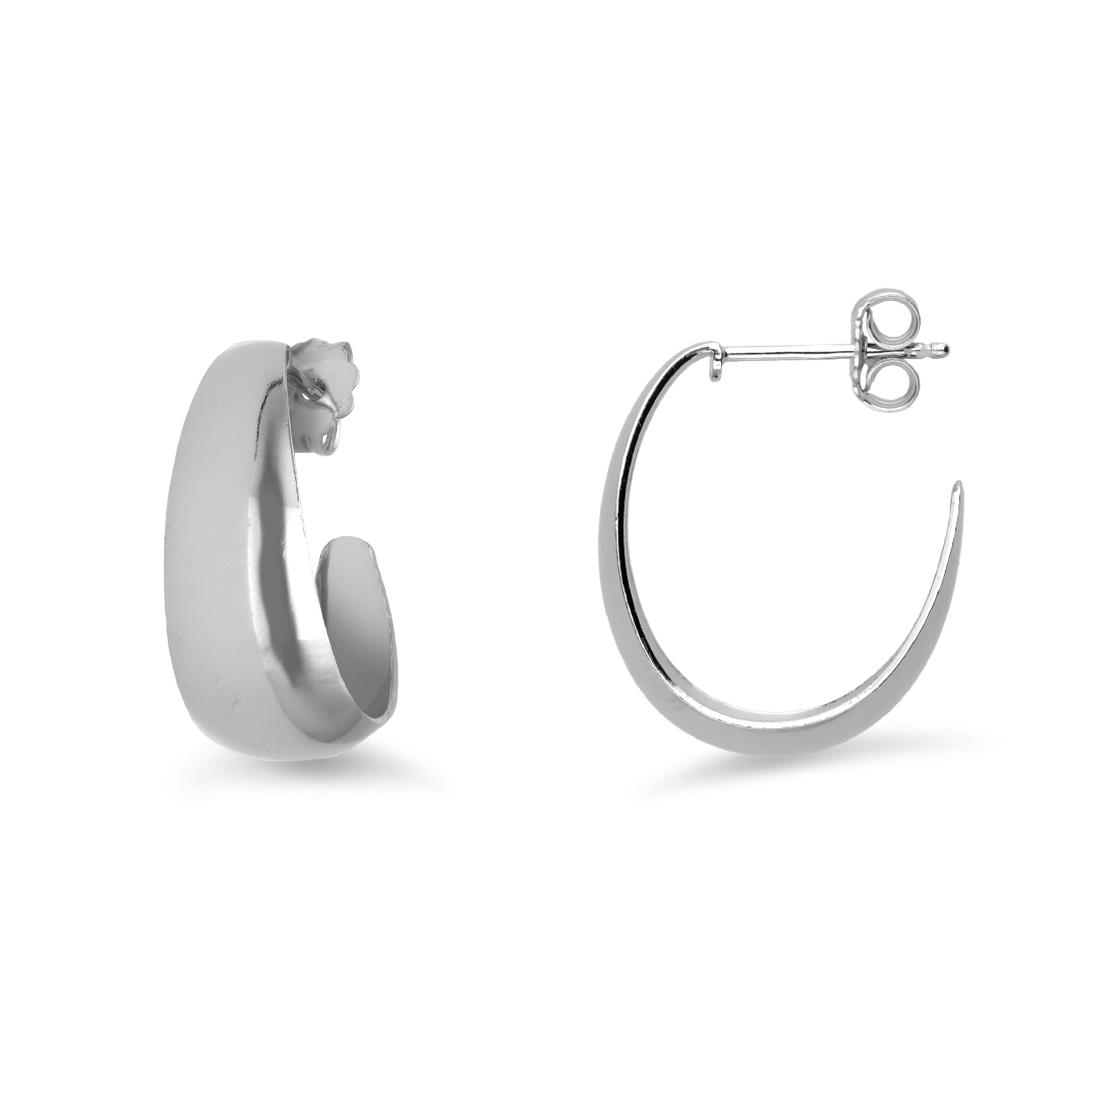 Oval convex earrings from the Hula Hoop collection in rhodium-plated 925 silver - LUXURY MILANO